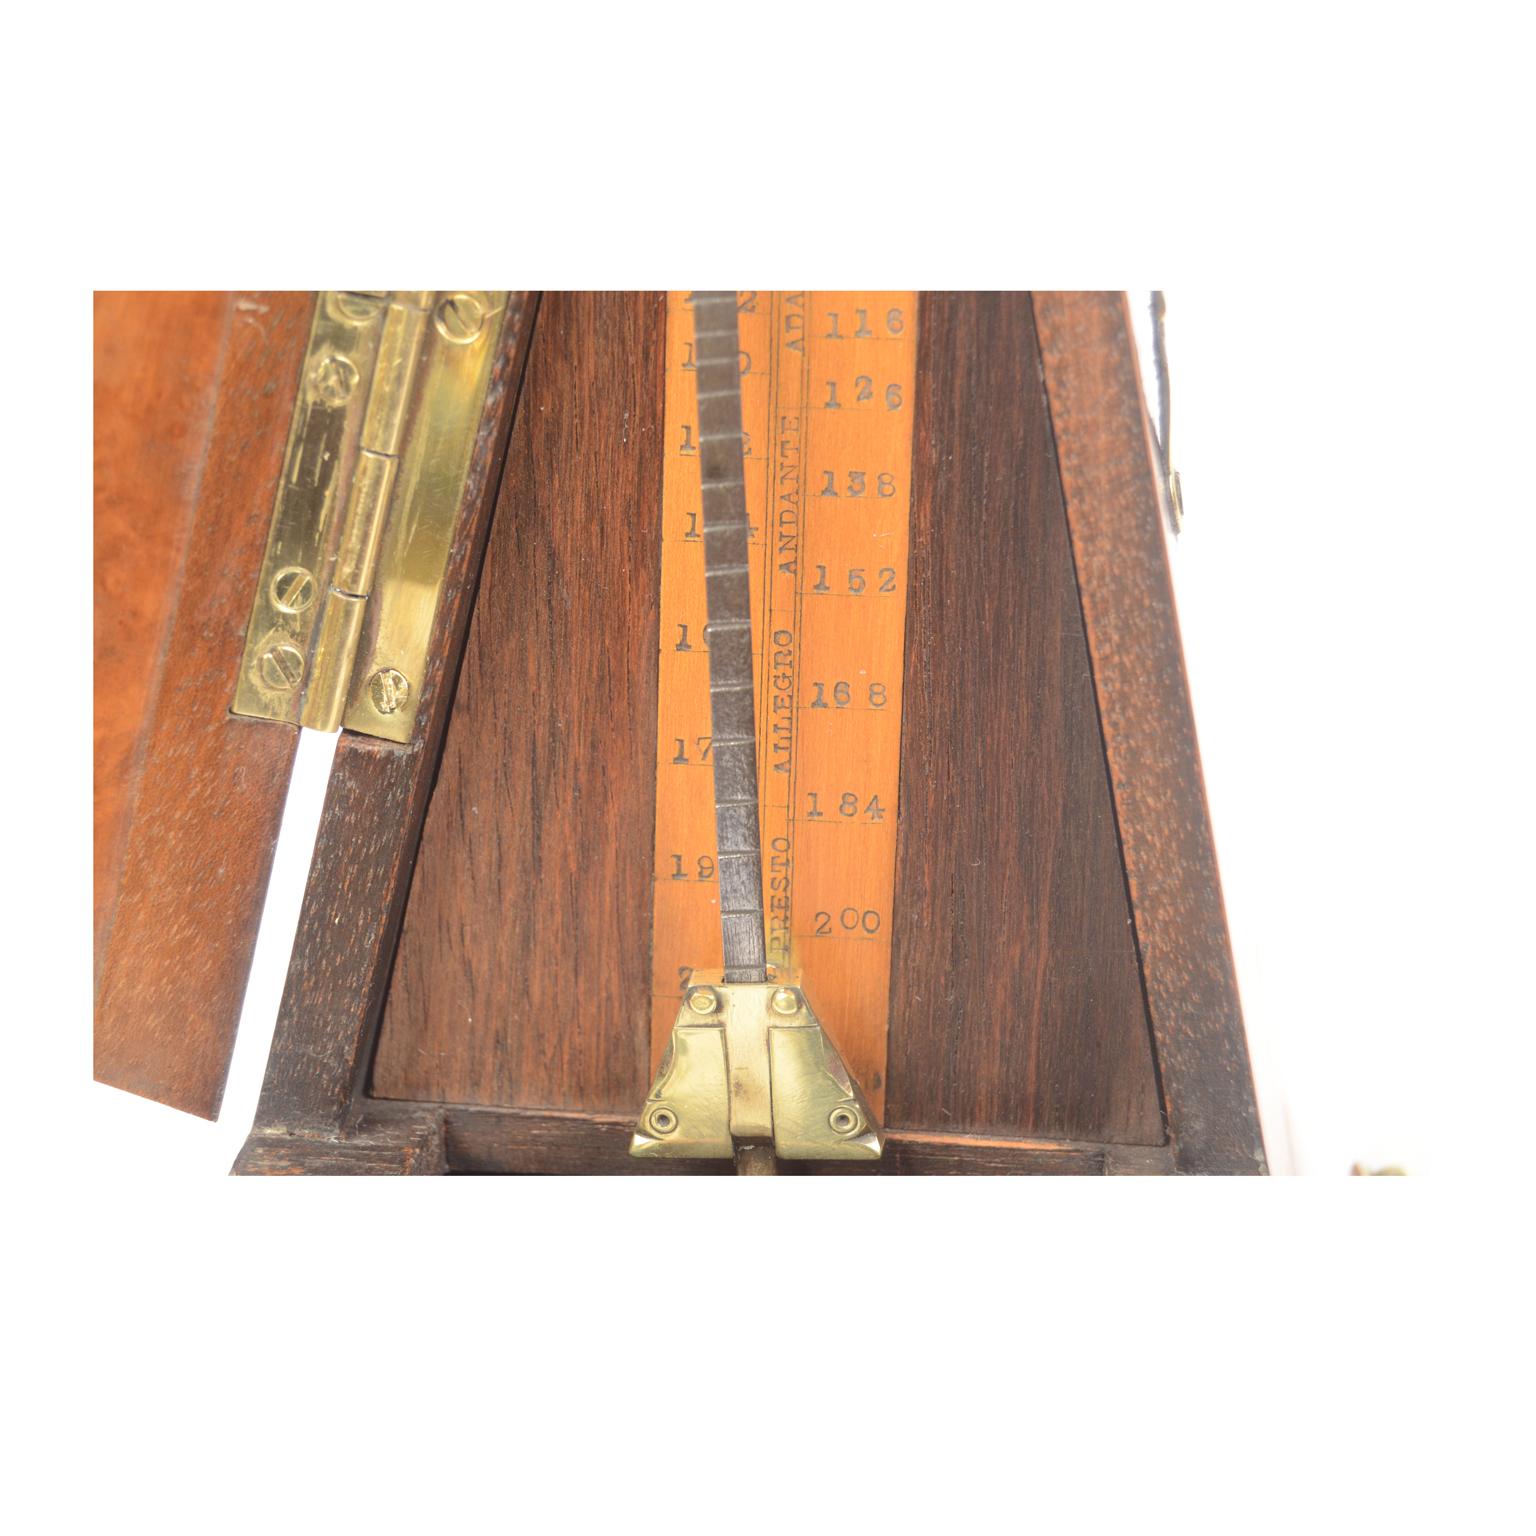 Metronome Made in the Late 19th Century  1